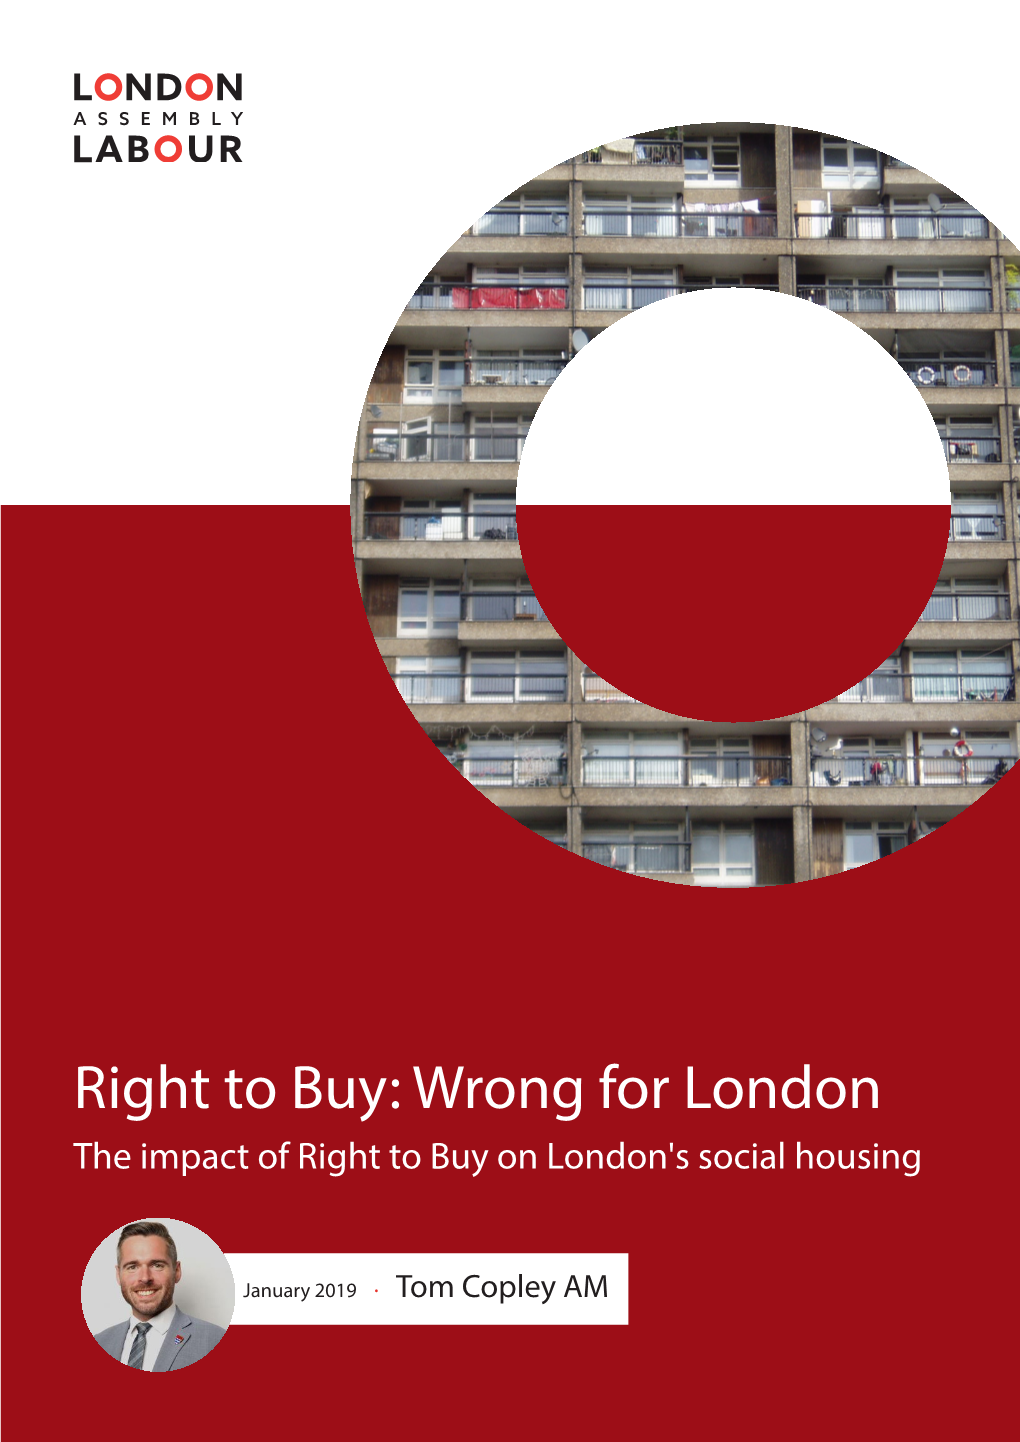 Right to Buy: Wrong for London the Impact of Right to Buy on London's Social Housing